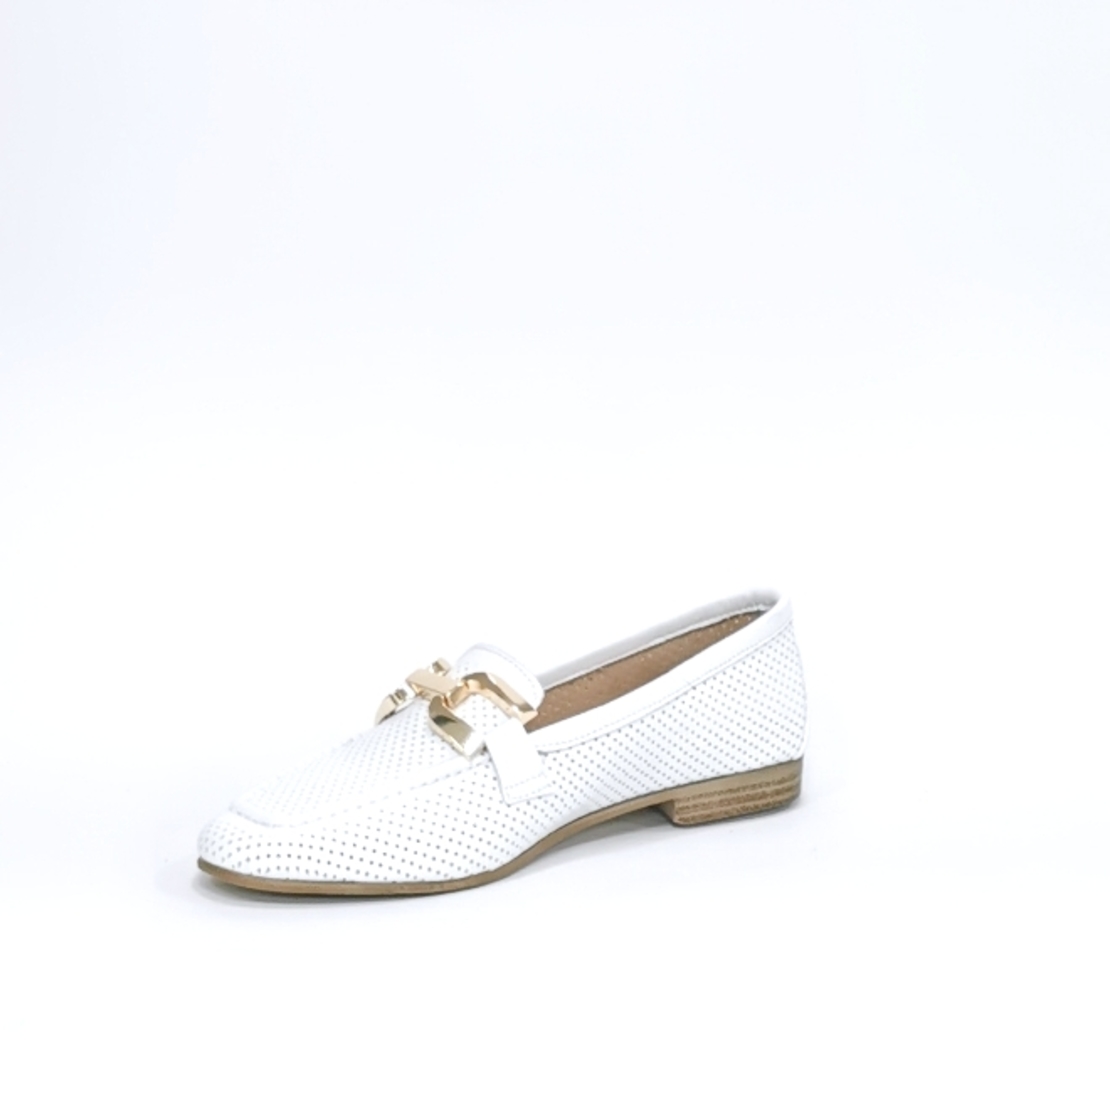 Women's moccasins / loafers / made of natural leather in white color/7163